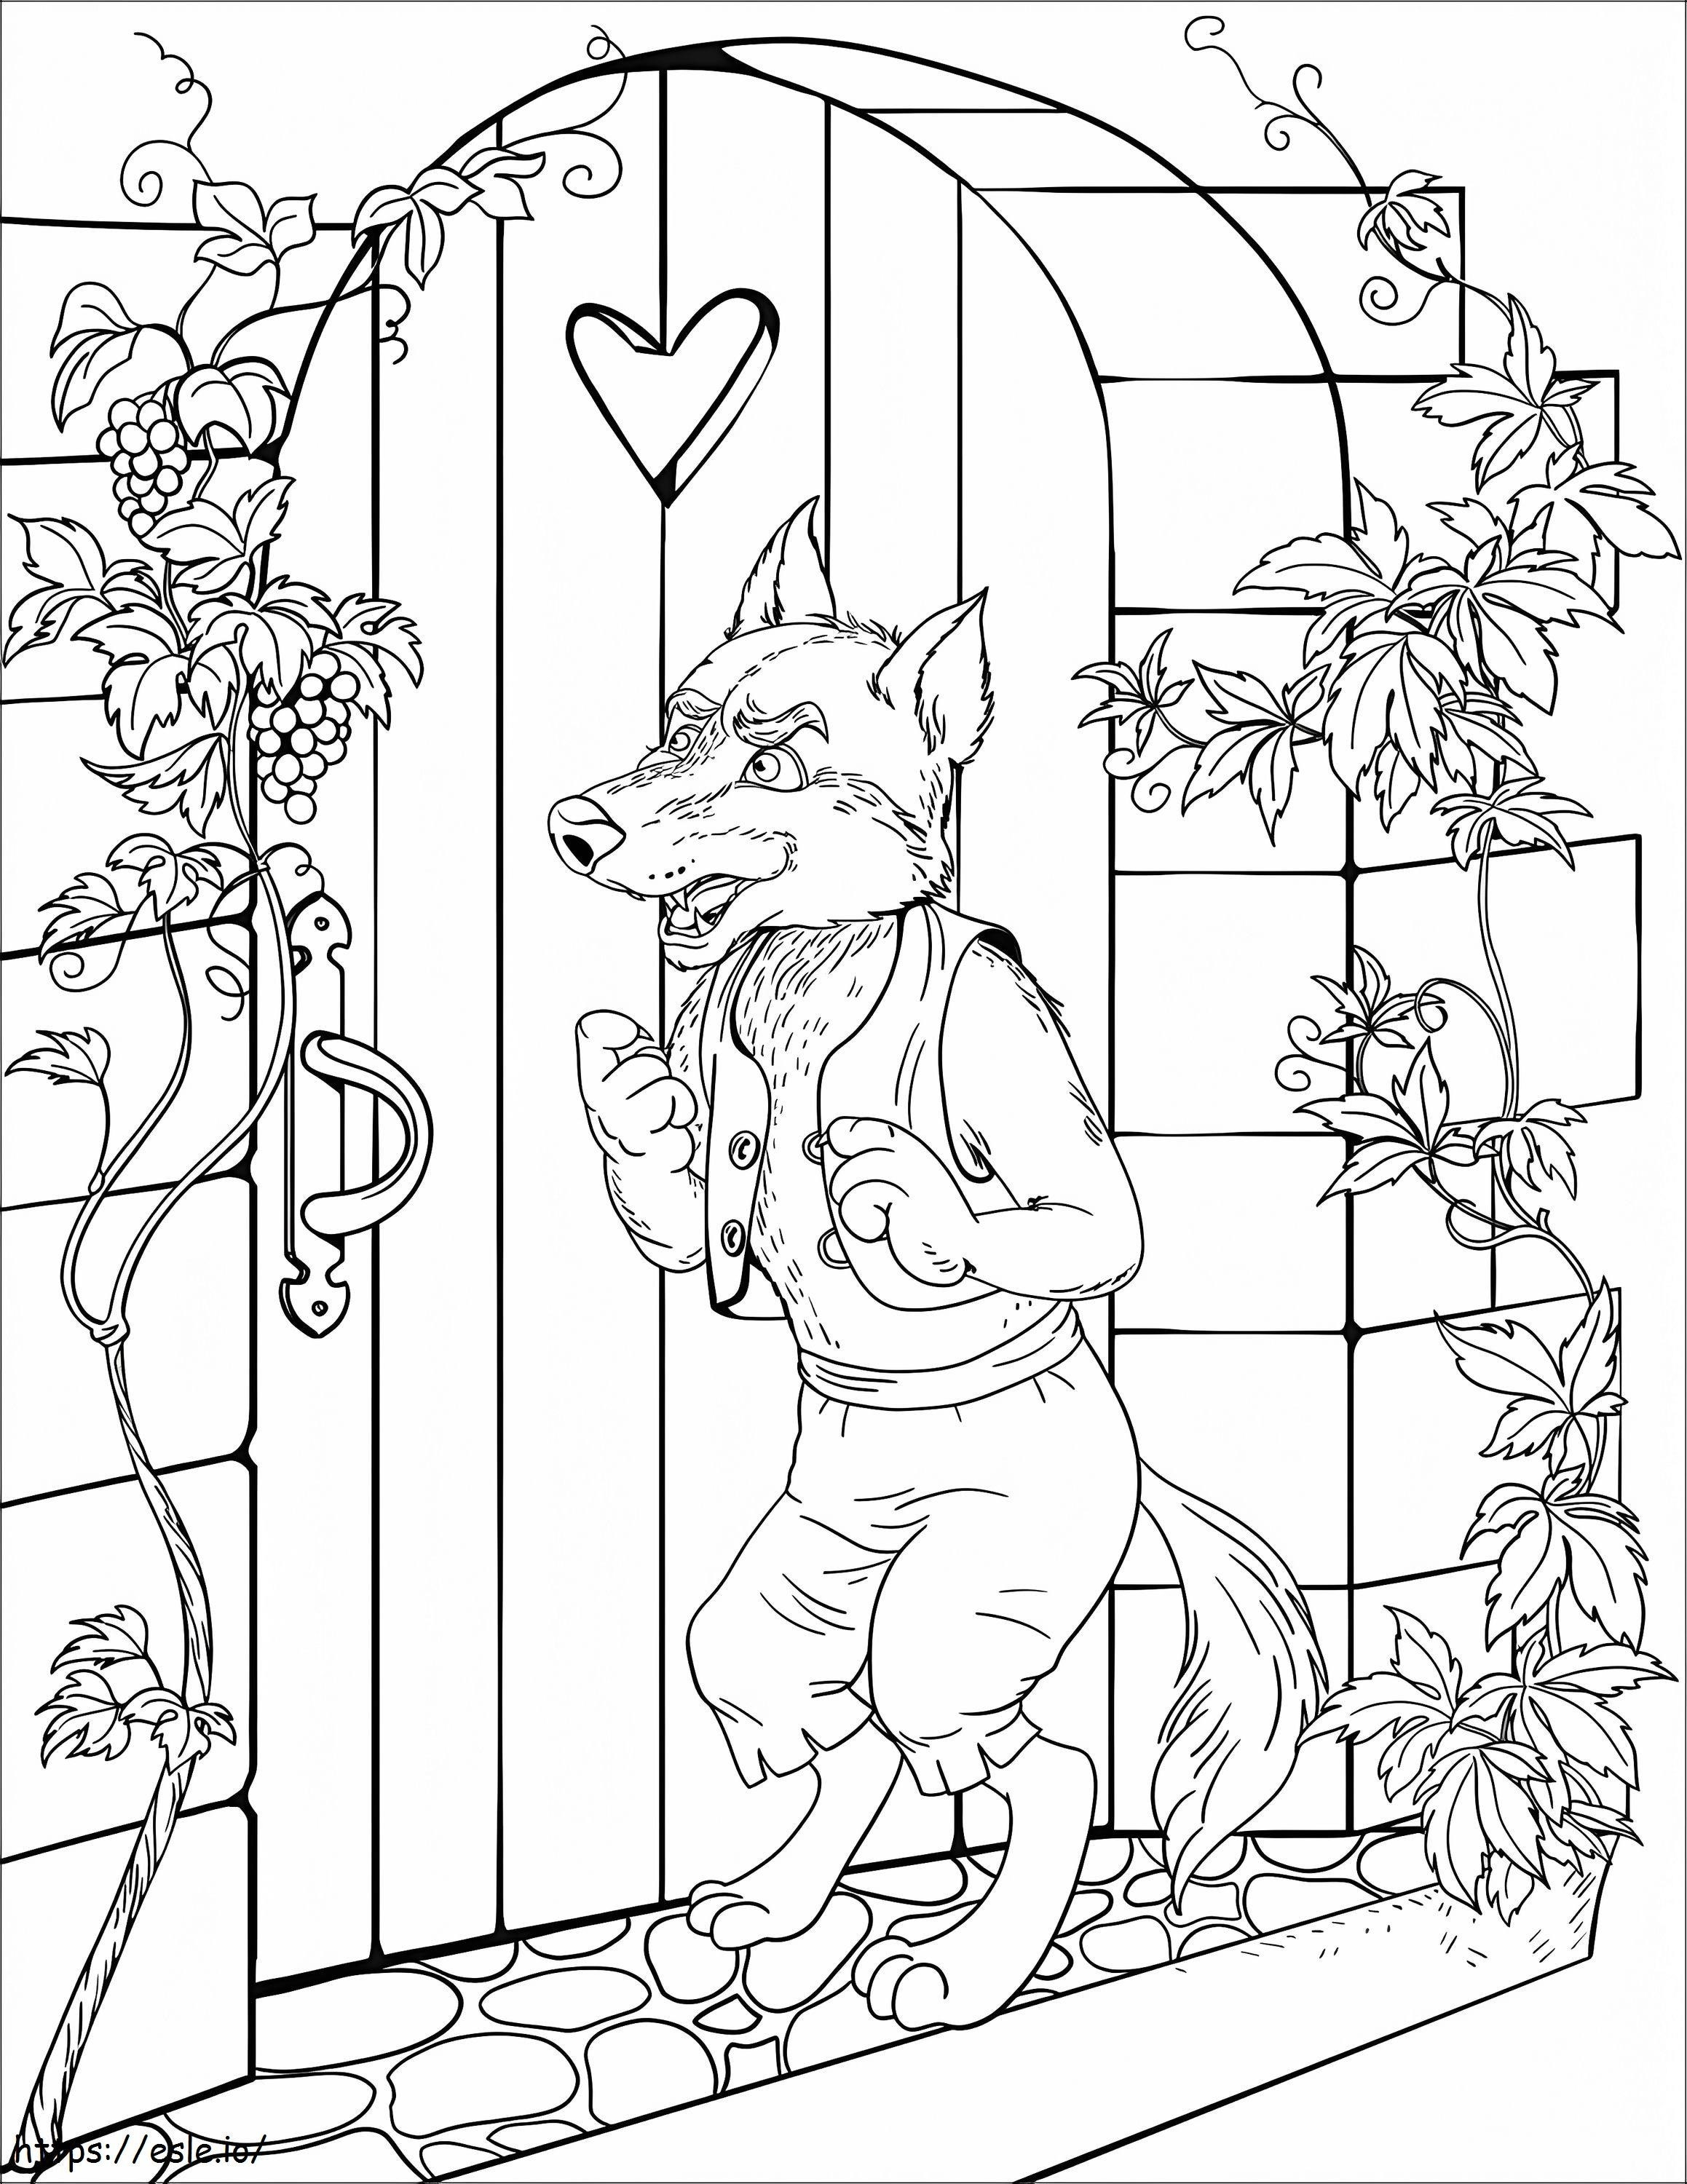 Wolf Knocks On The Door coloring page